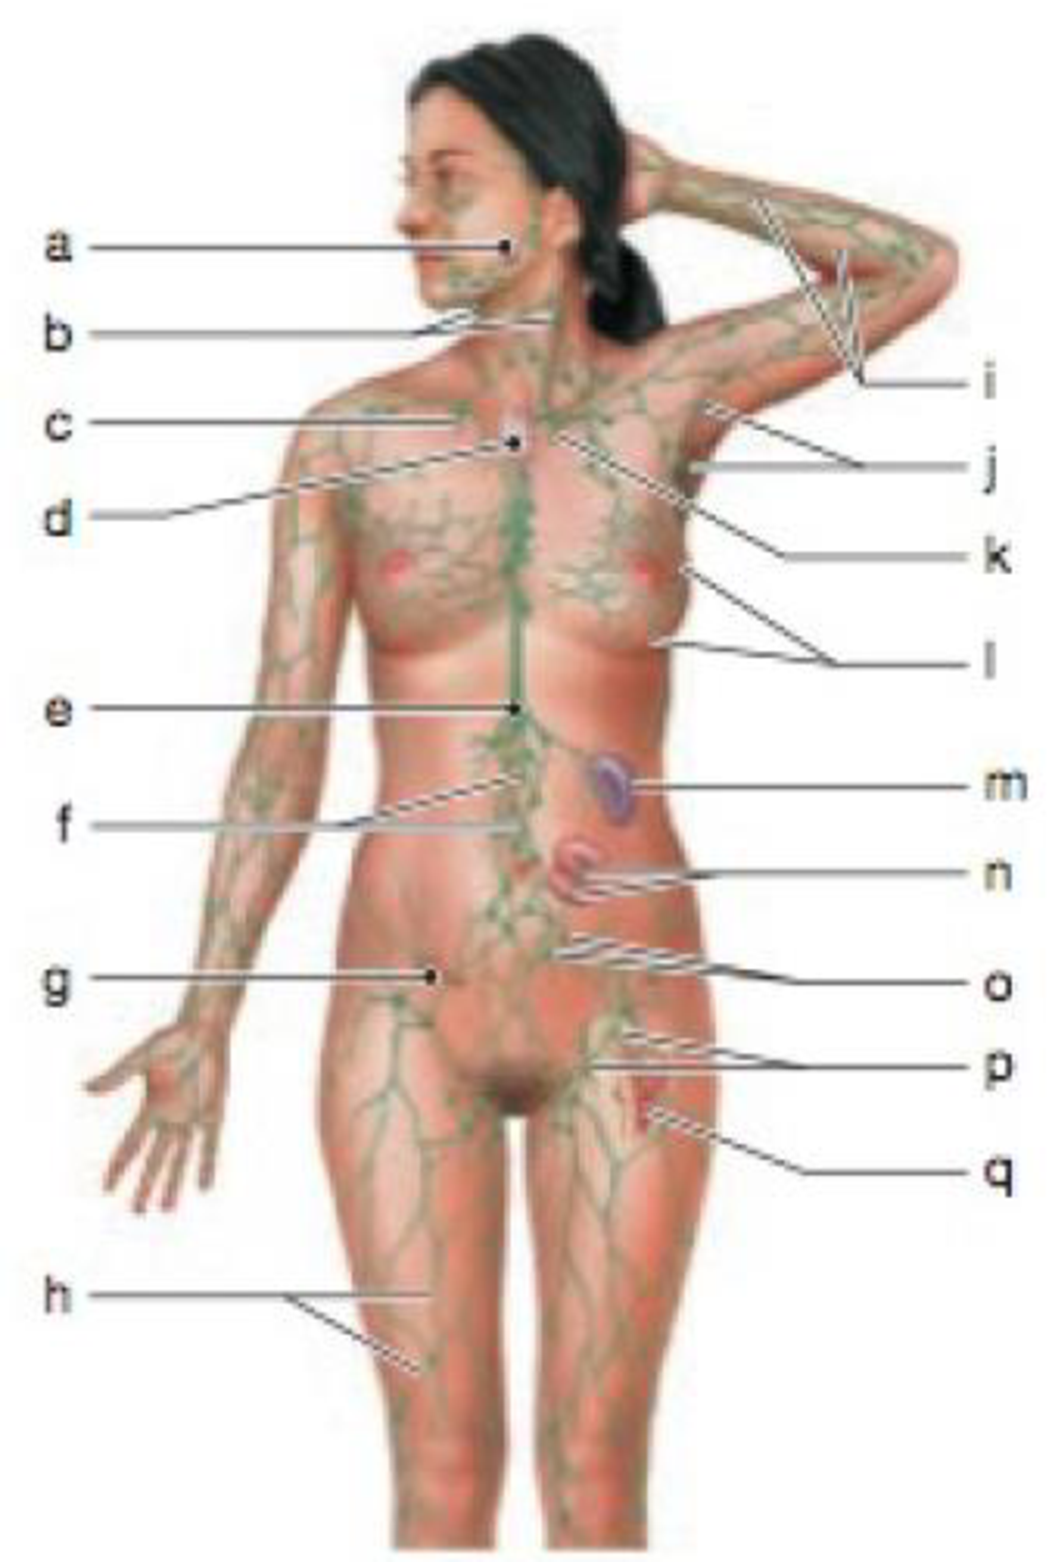 Chapter 22, Problem 1RQ, LEVEL 1 Reviewing Facts and Terms 1. Identify the structures of the lymphatic system in the 